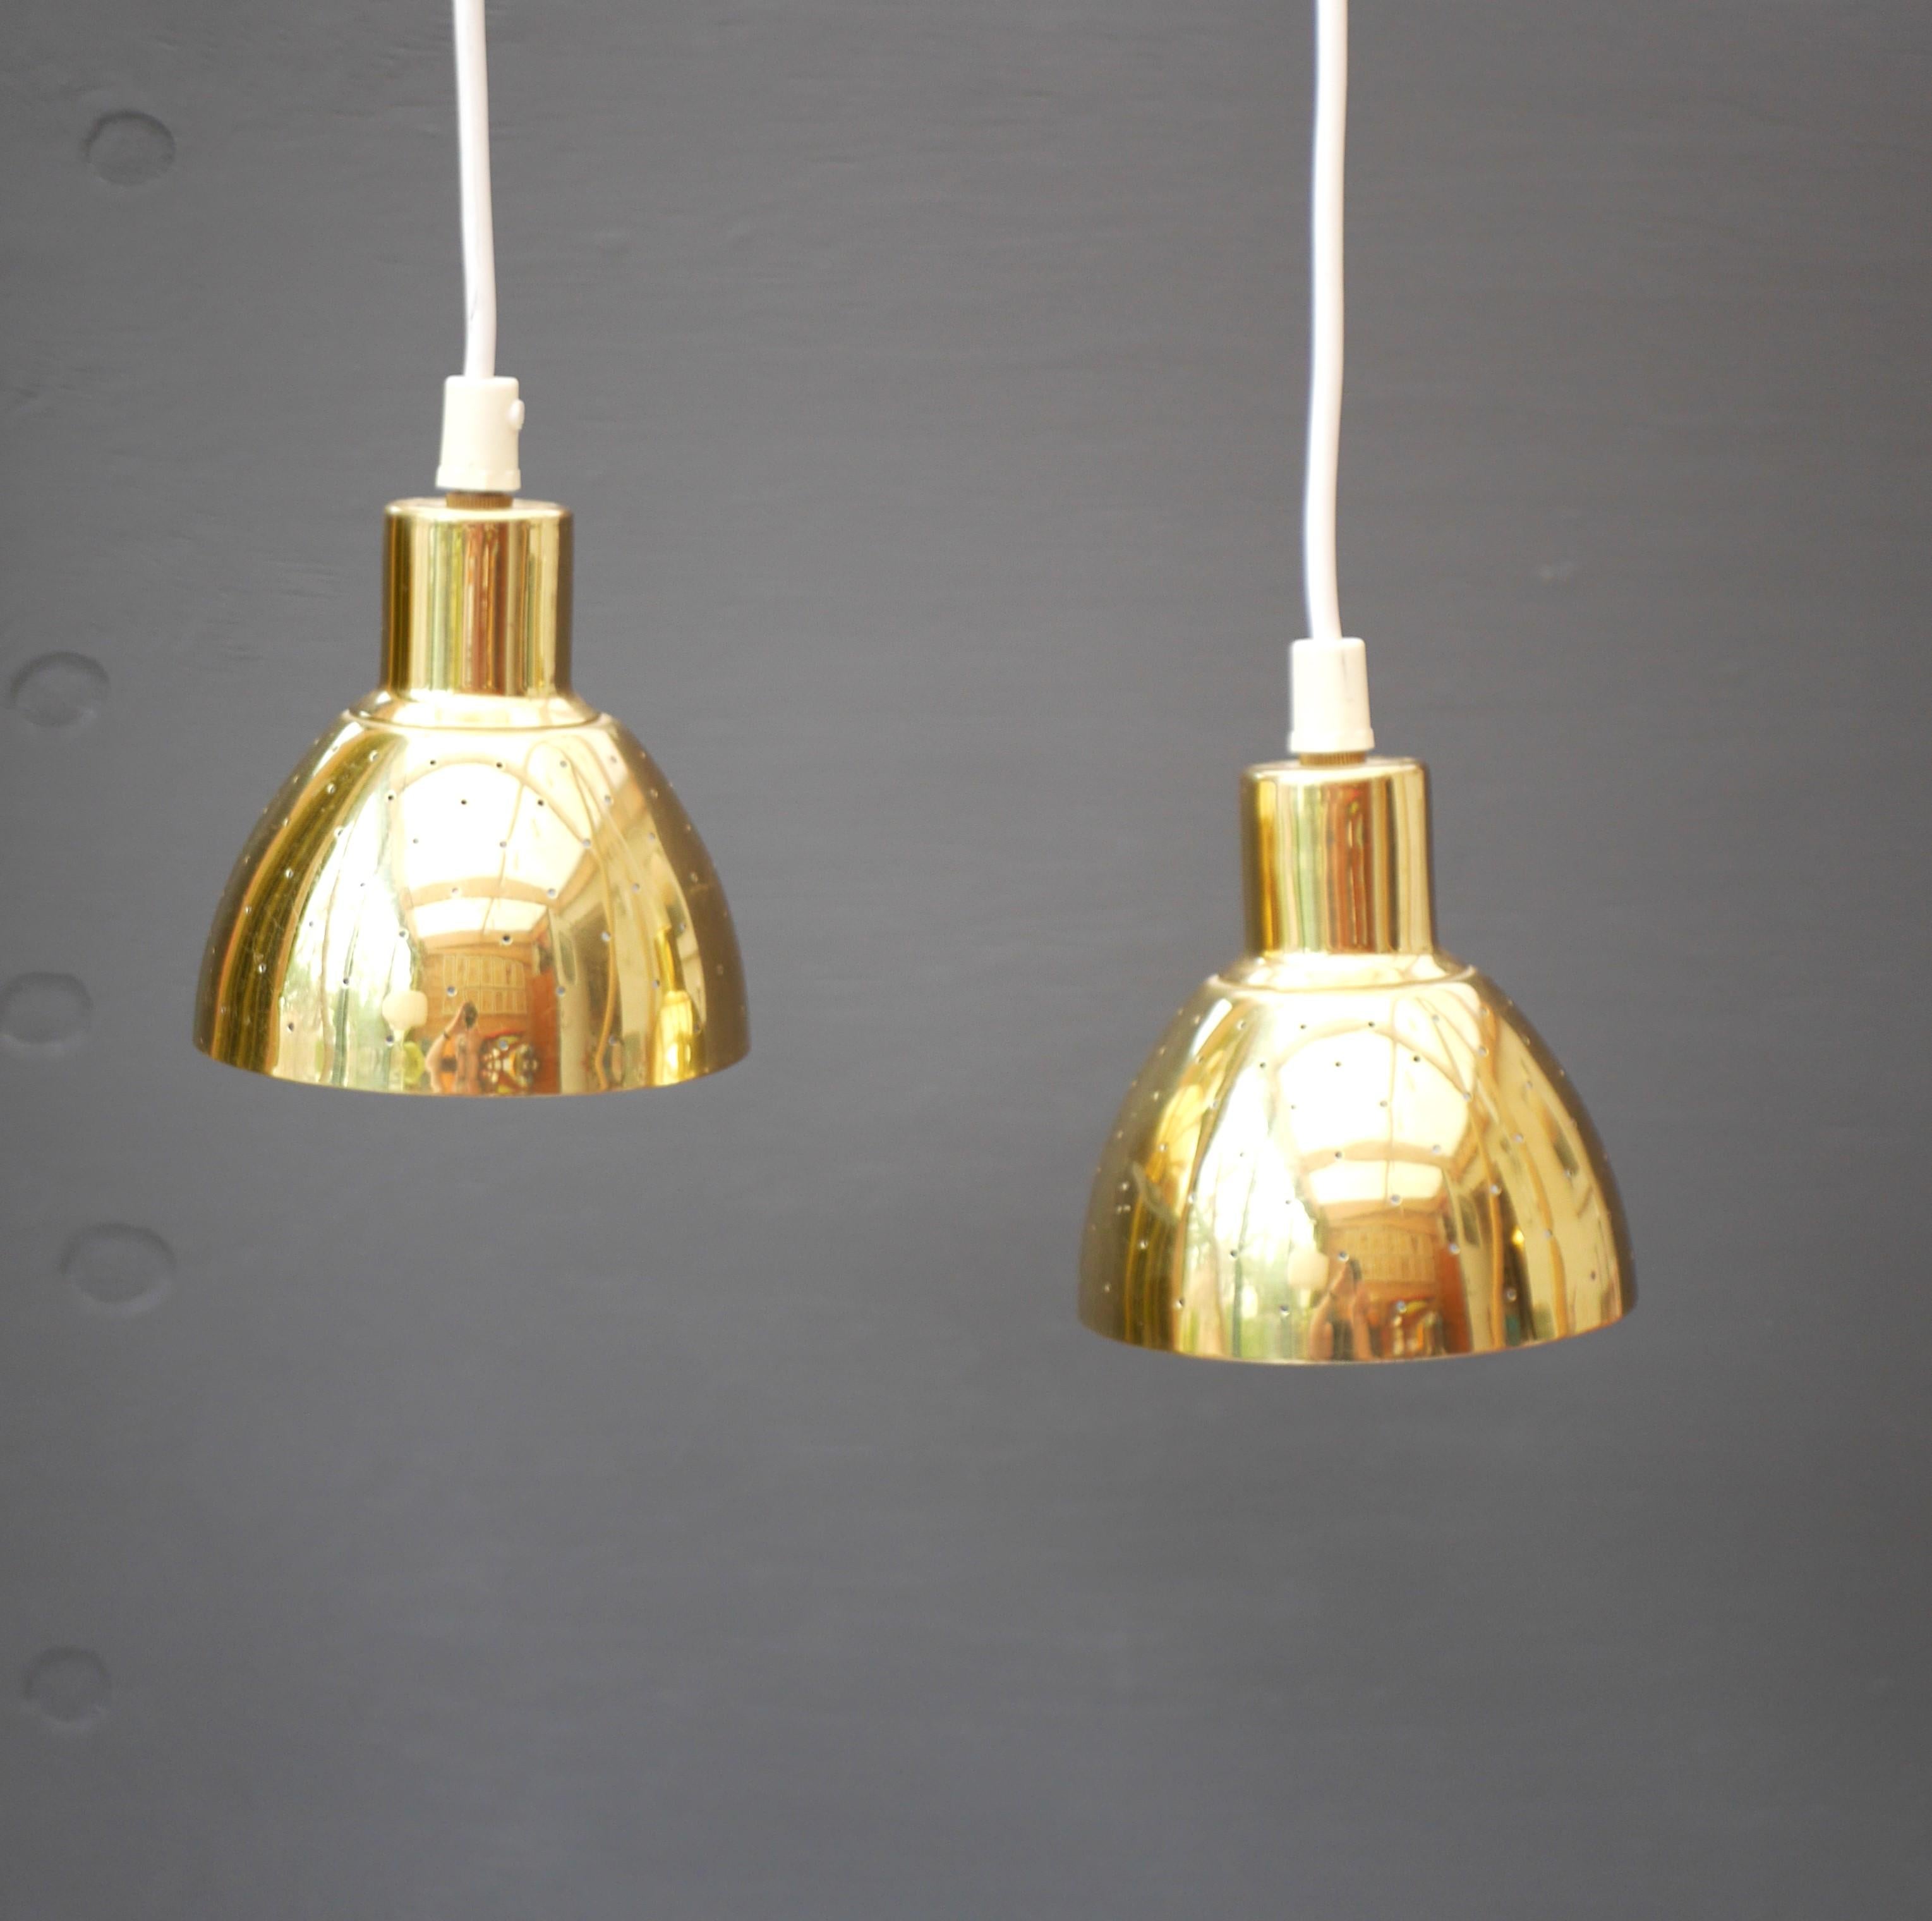 Pendant lamps which will Illuminate your space and create a very special feeling, these small lamps which is designed by the talented Swedish designer Hans-Agne Jakobsson for Markaryd in the 1960s, yet these lamps still have a contemporary feeling.